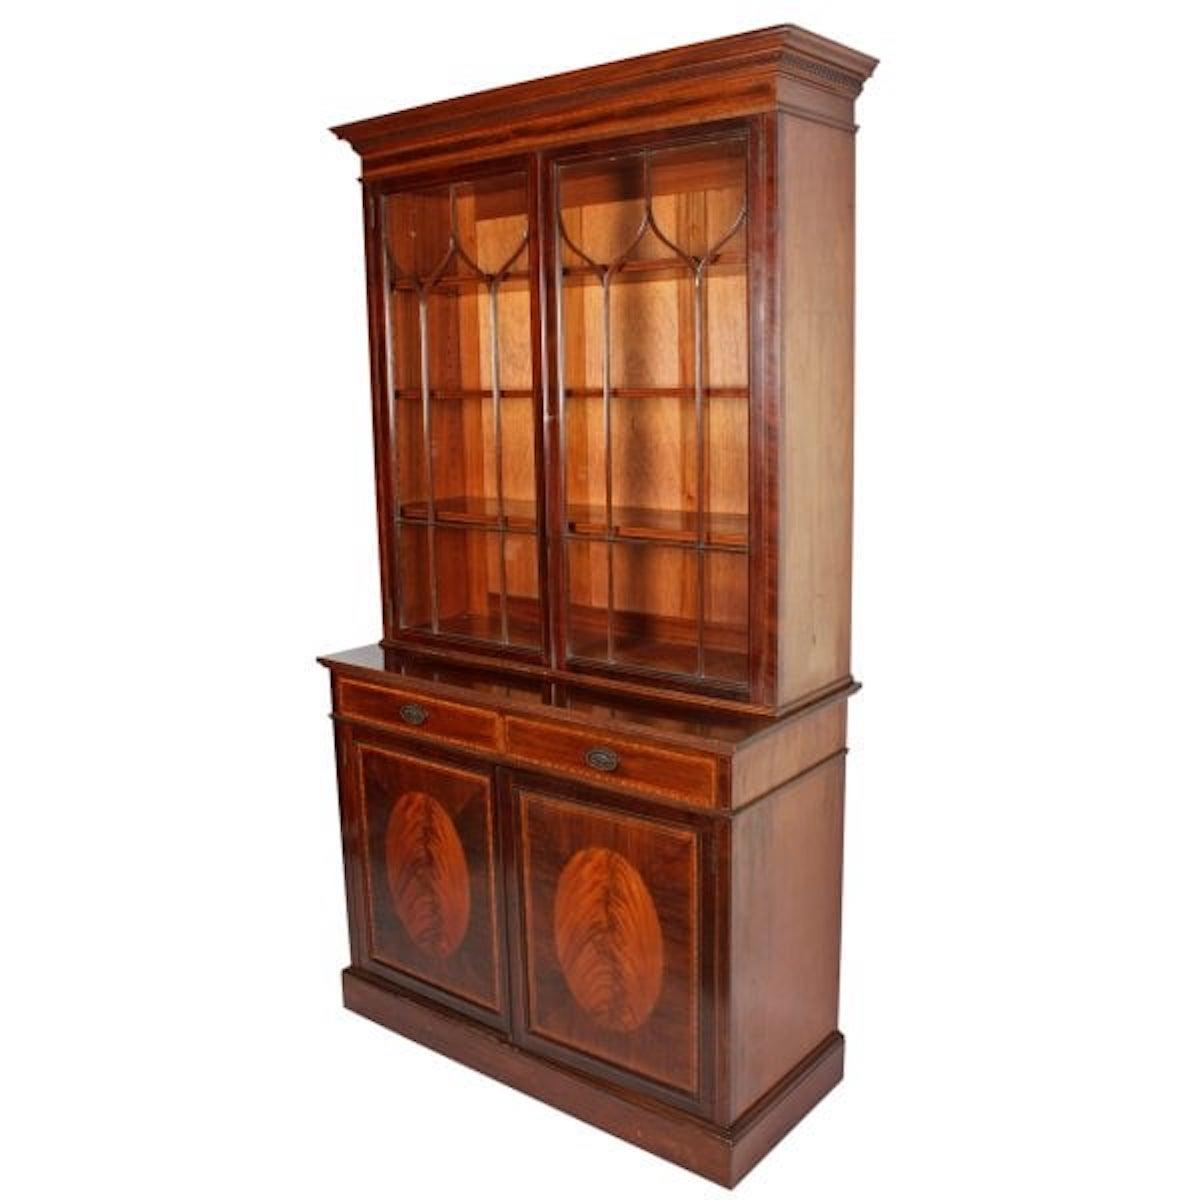 Mahogany bookcase by Waring & Gillows

An early 20th century mahogany Sheraton style bookcase by Waring & Gillows.

The bookcase has an astragal glazed two door cabinet top with three adjustable mahogany shelves.

The base has a pair of